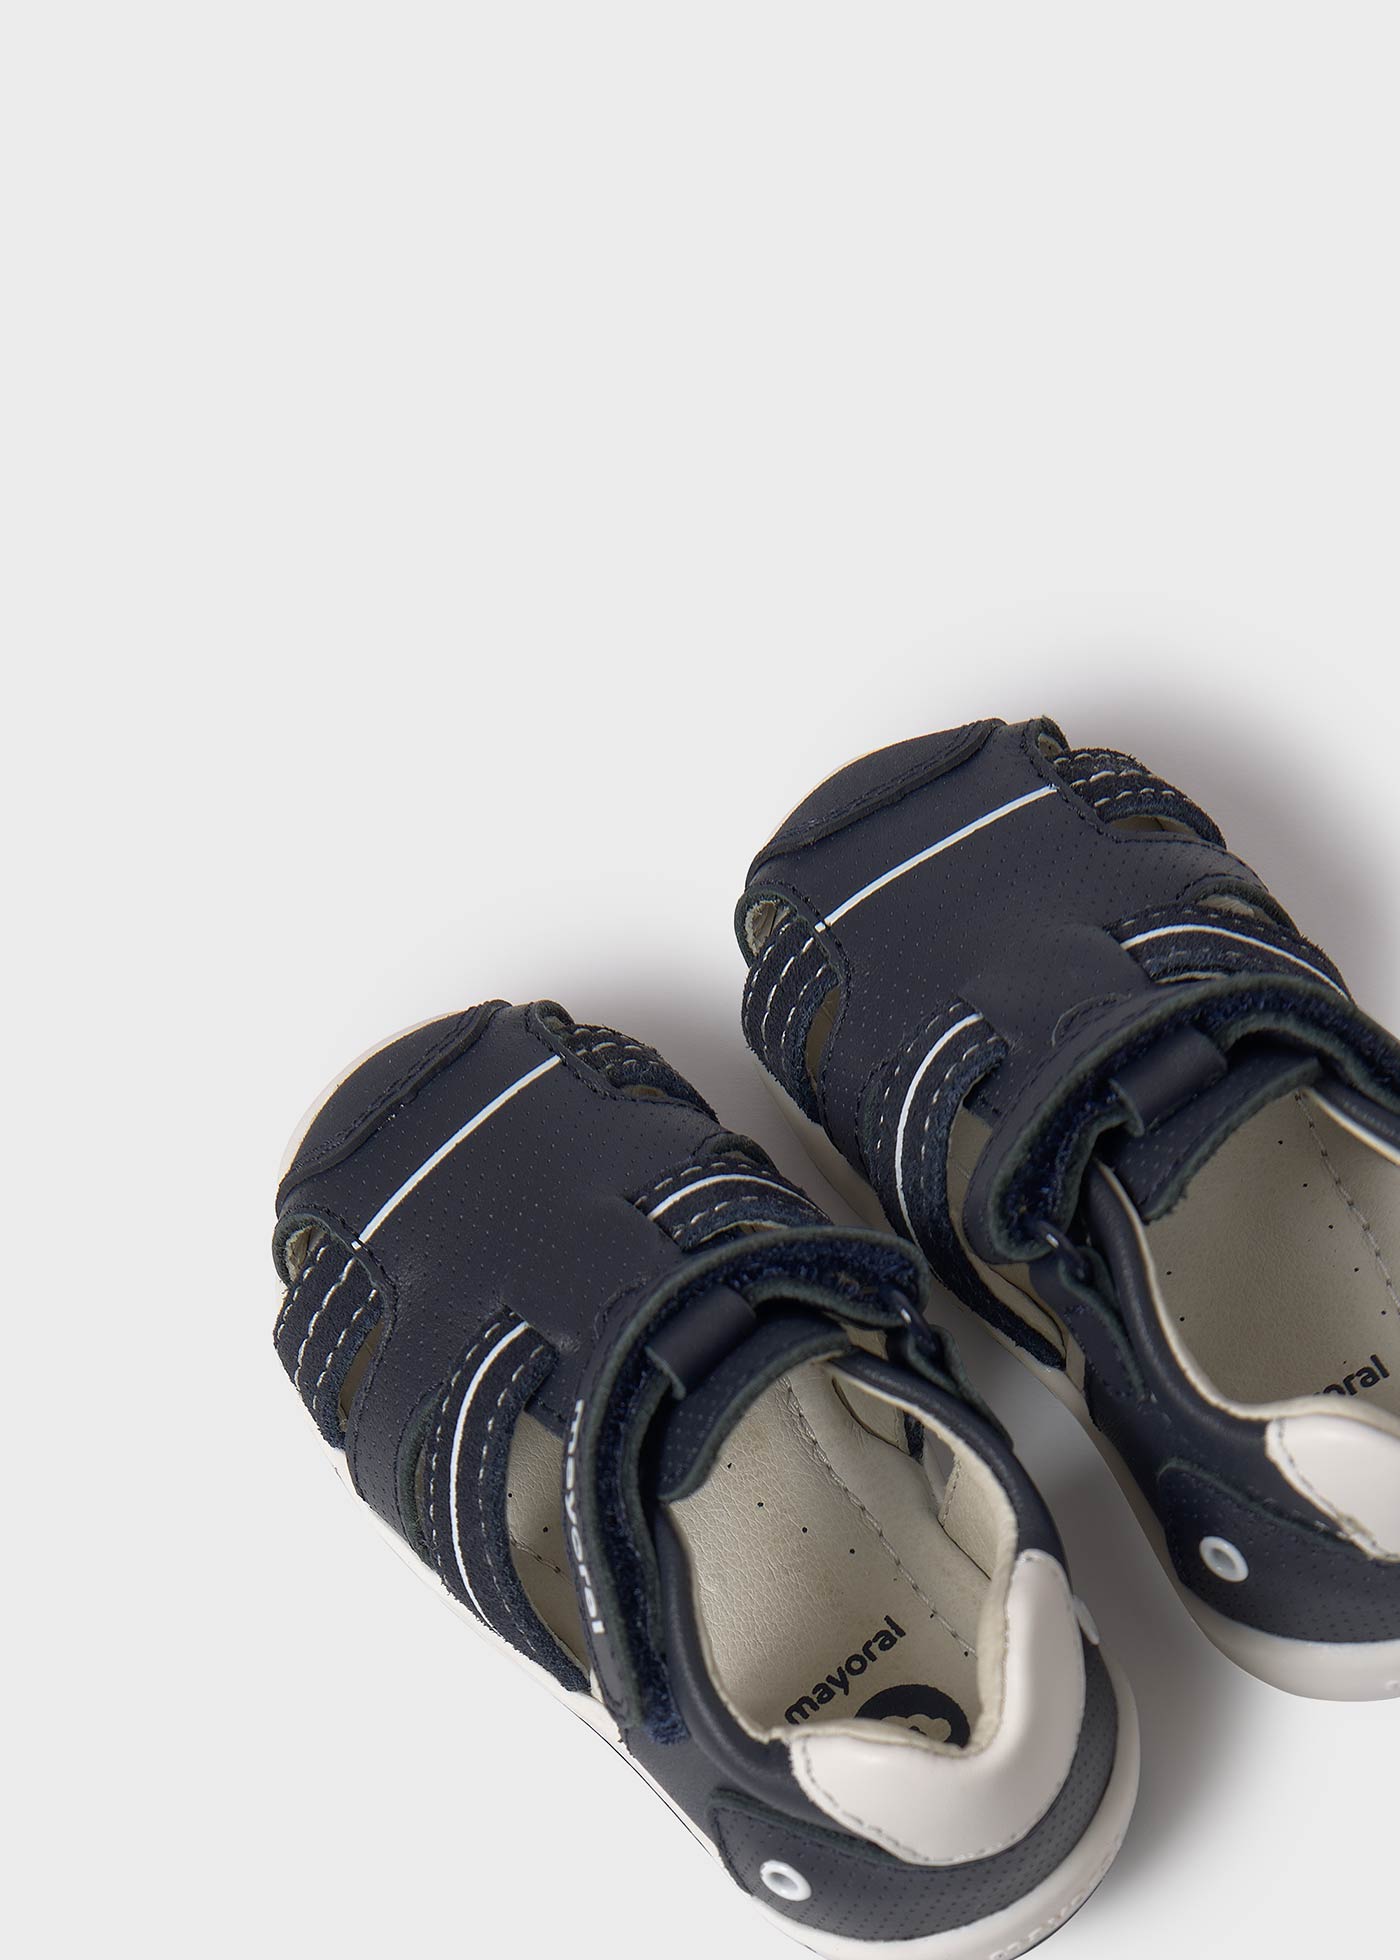 Baby Sandals Sustainable Leather